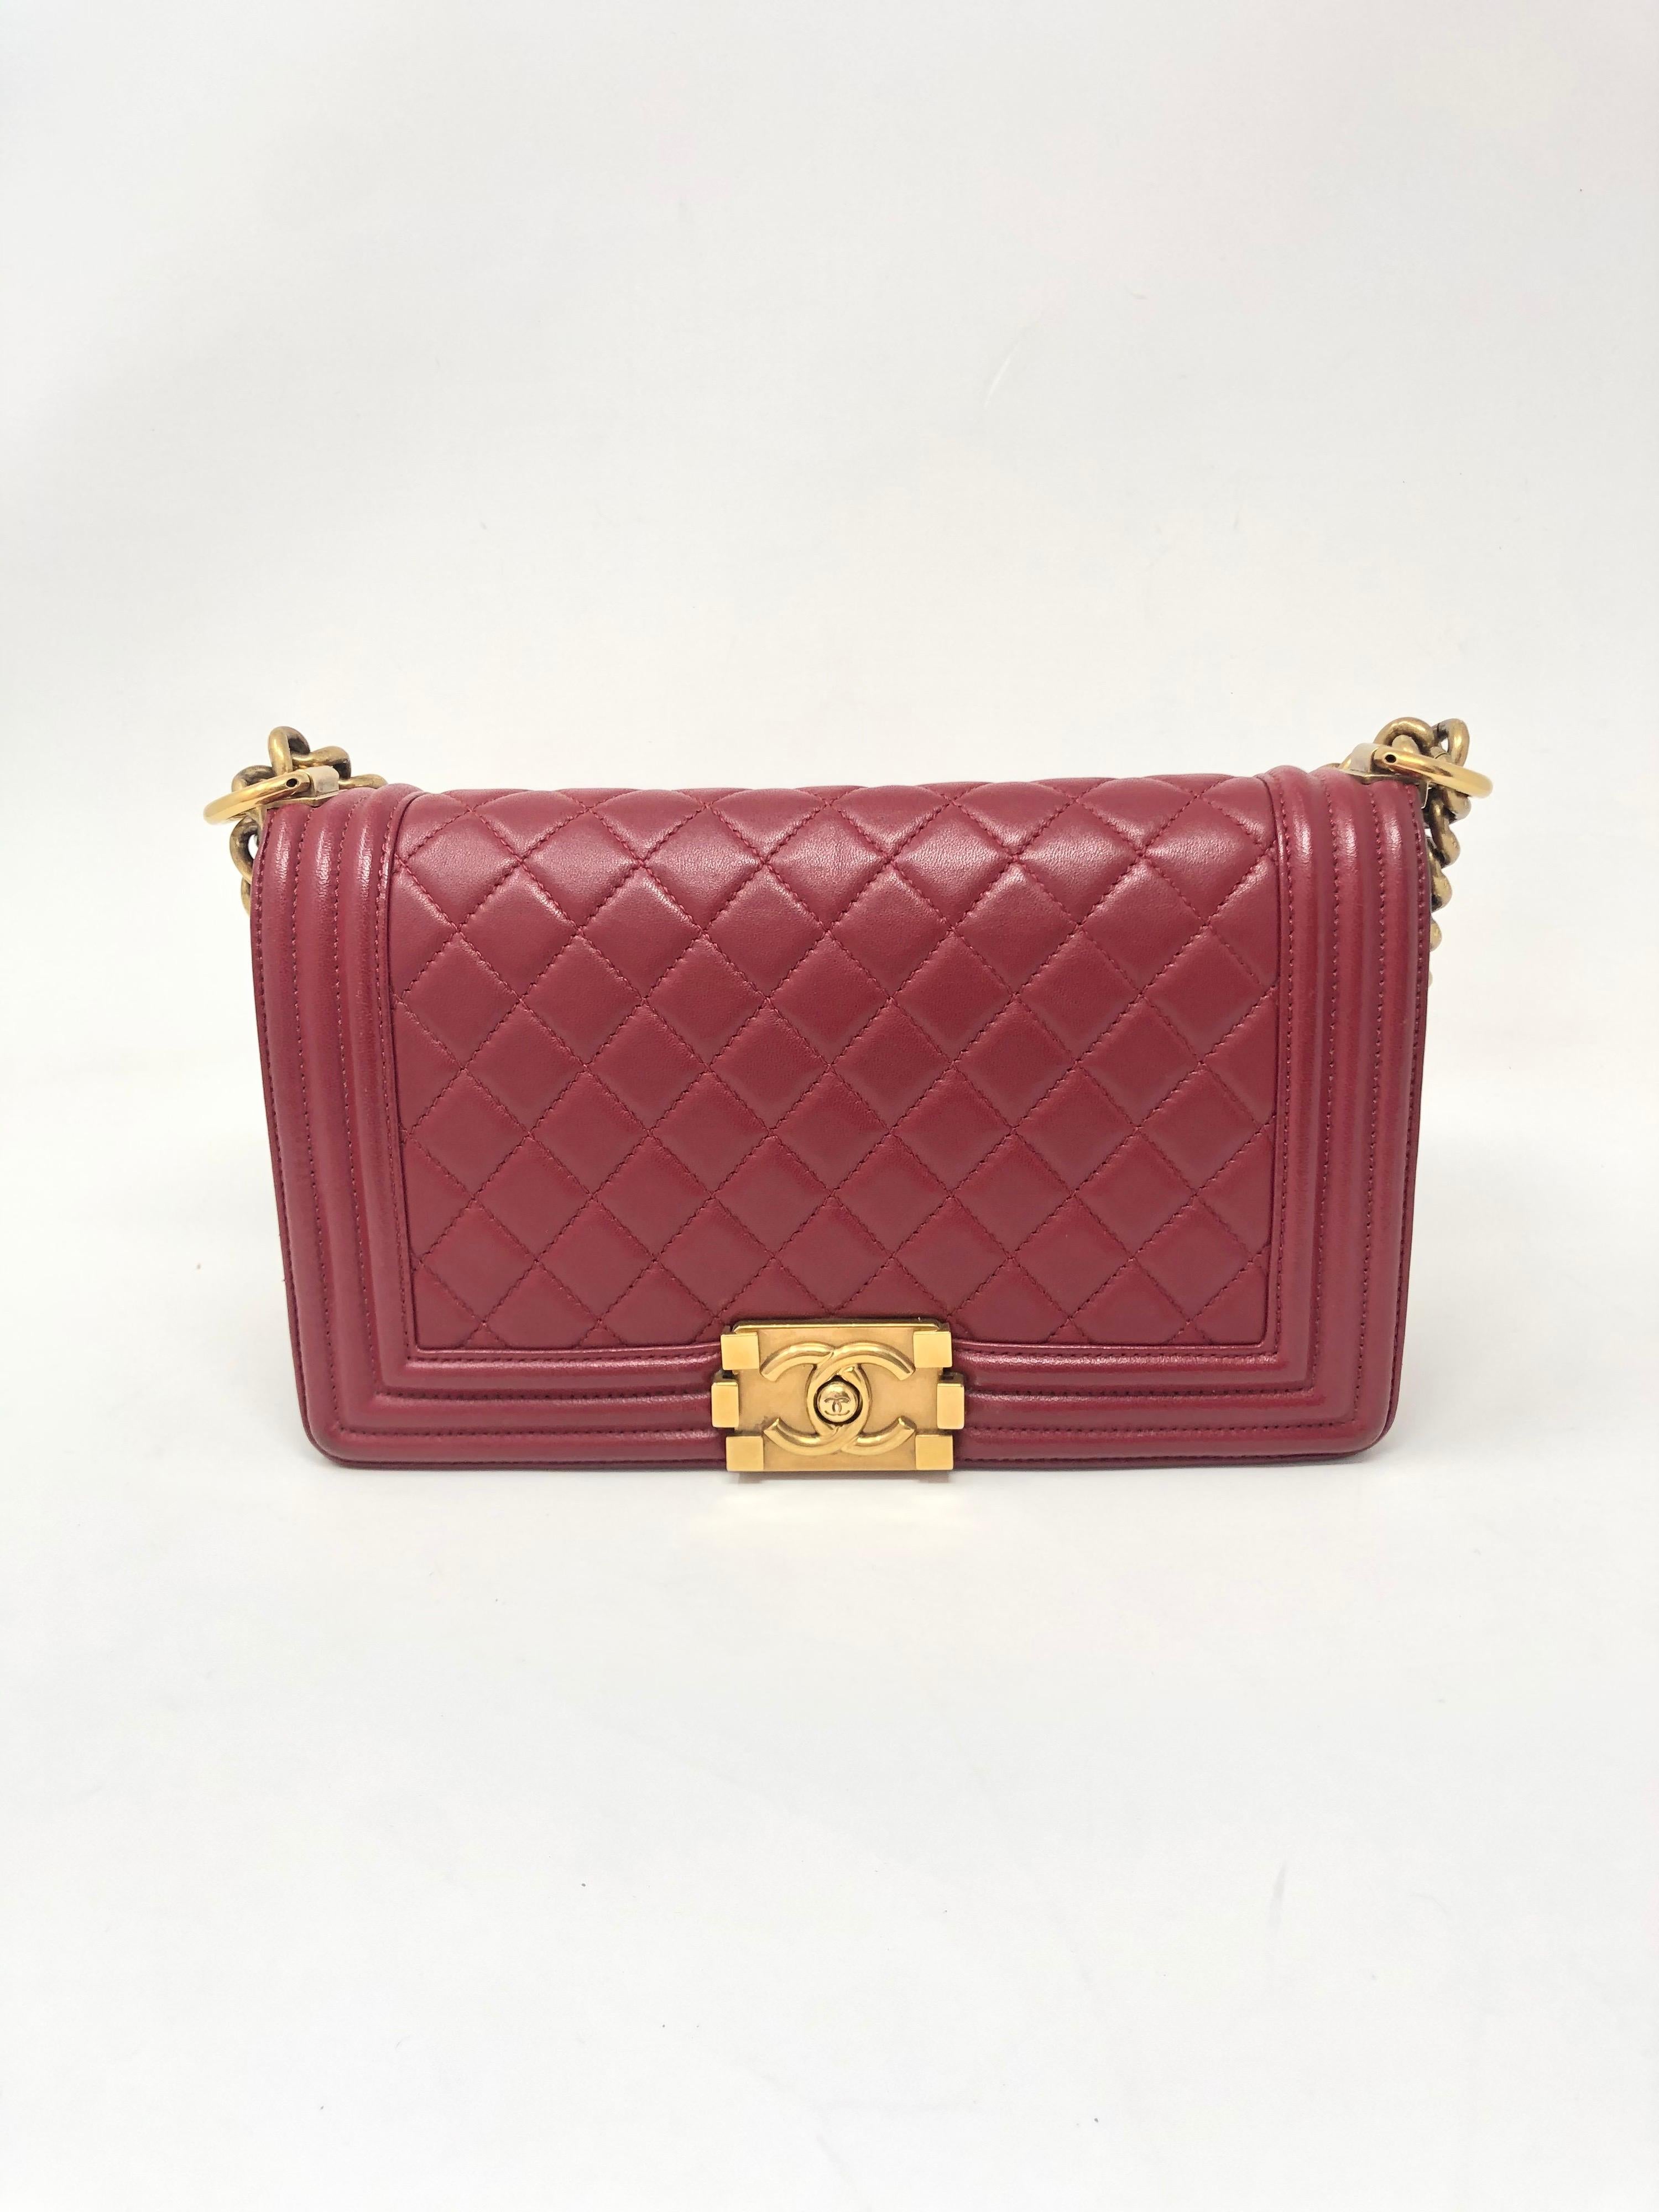 Chanel Boy Red Bag Medium Size. Gold hardware. Good condition. Dark brick red lambskin leather. Can be worn crossbody or doubled as a shoulder bag. Guaranteed authentic. 